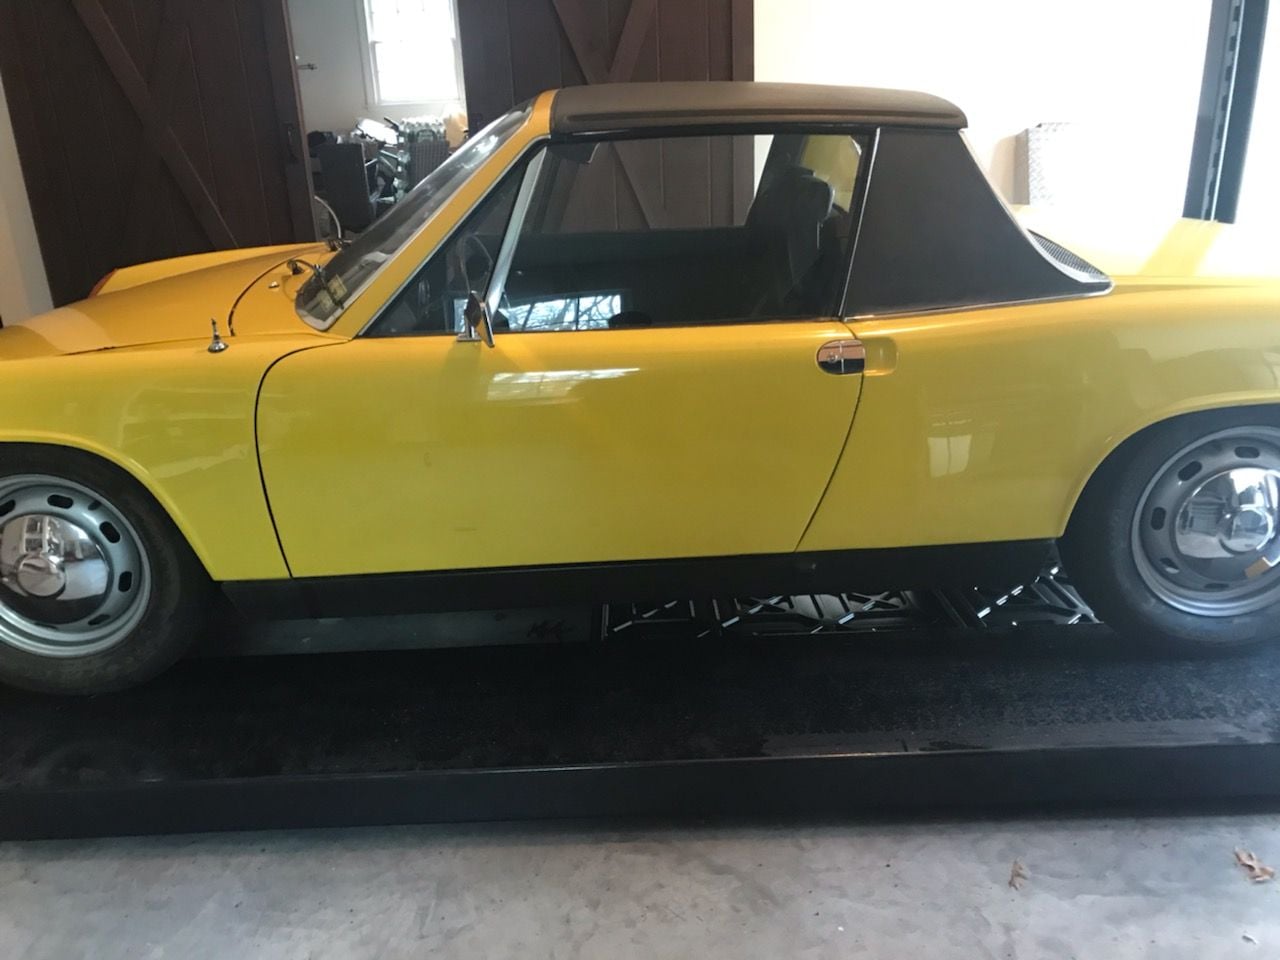 1970 Porsche 914 - Original Owner 1970 Yellow 914 - Used - VIN 4702901742 - 88,050 Miles - 4 cyl - 2WD - Manual - Convertible - Yellow - Farmington, CT 06032, United States